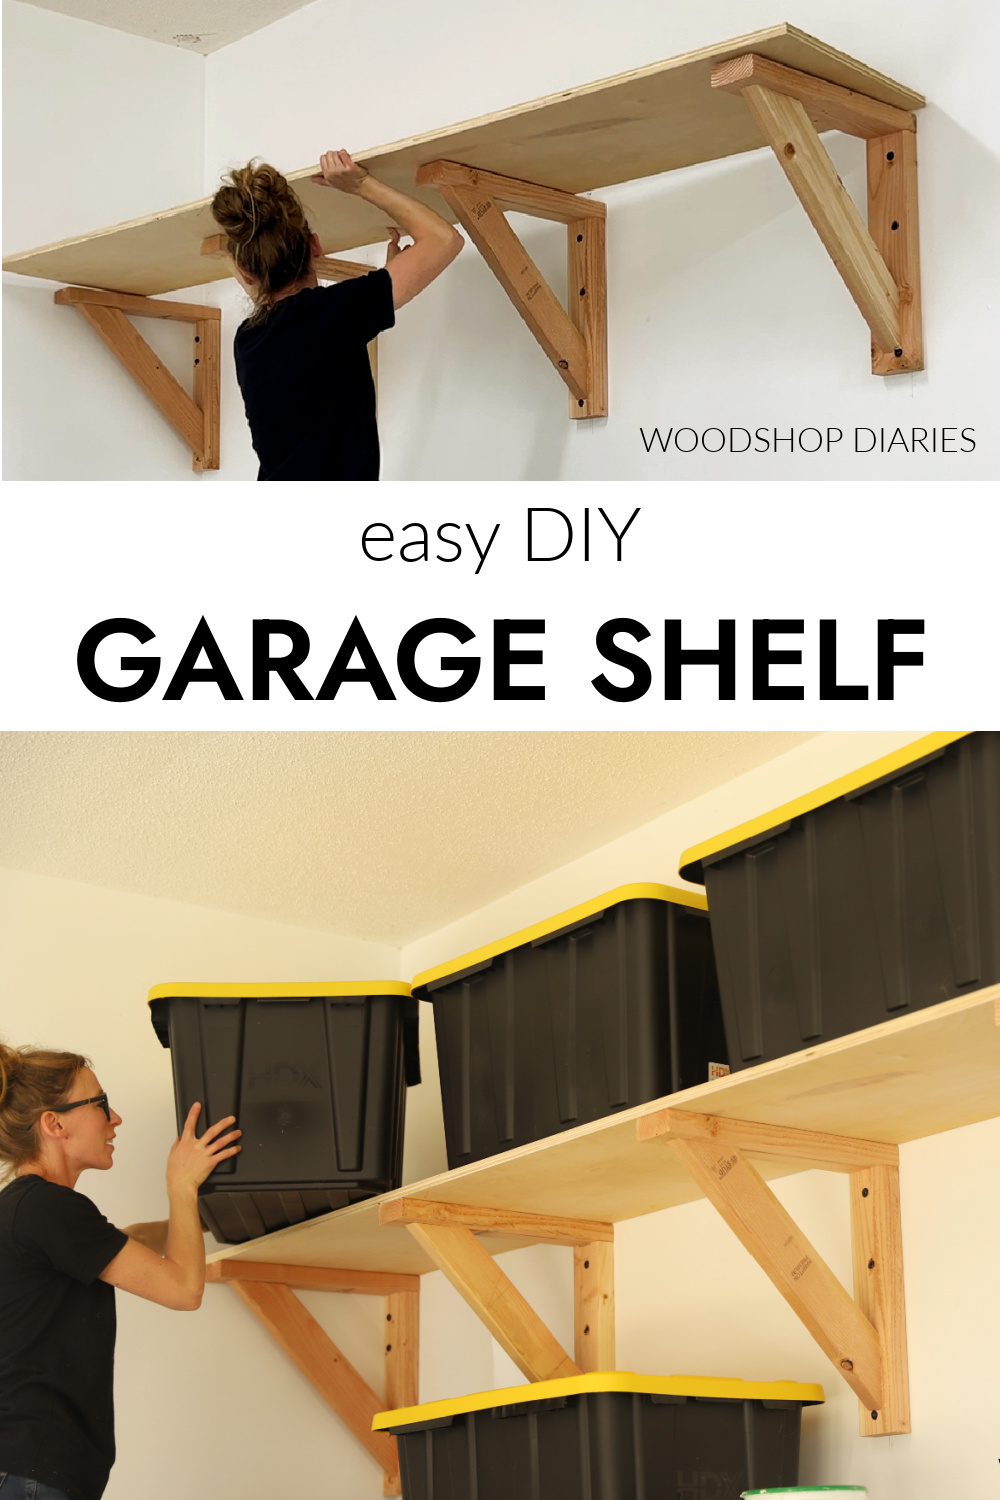 Pinterest collage image showing Shara installing plywood on supports at top and placing storage totes on shelf at bottom with text "easy DIY garage shelf"